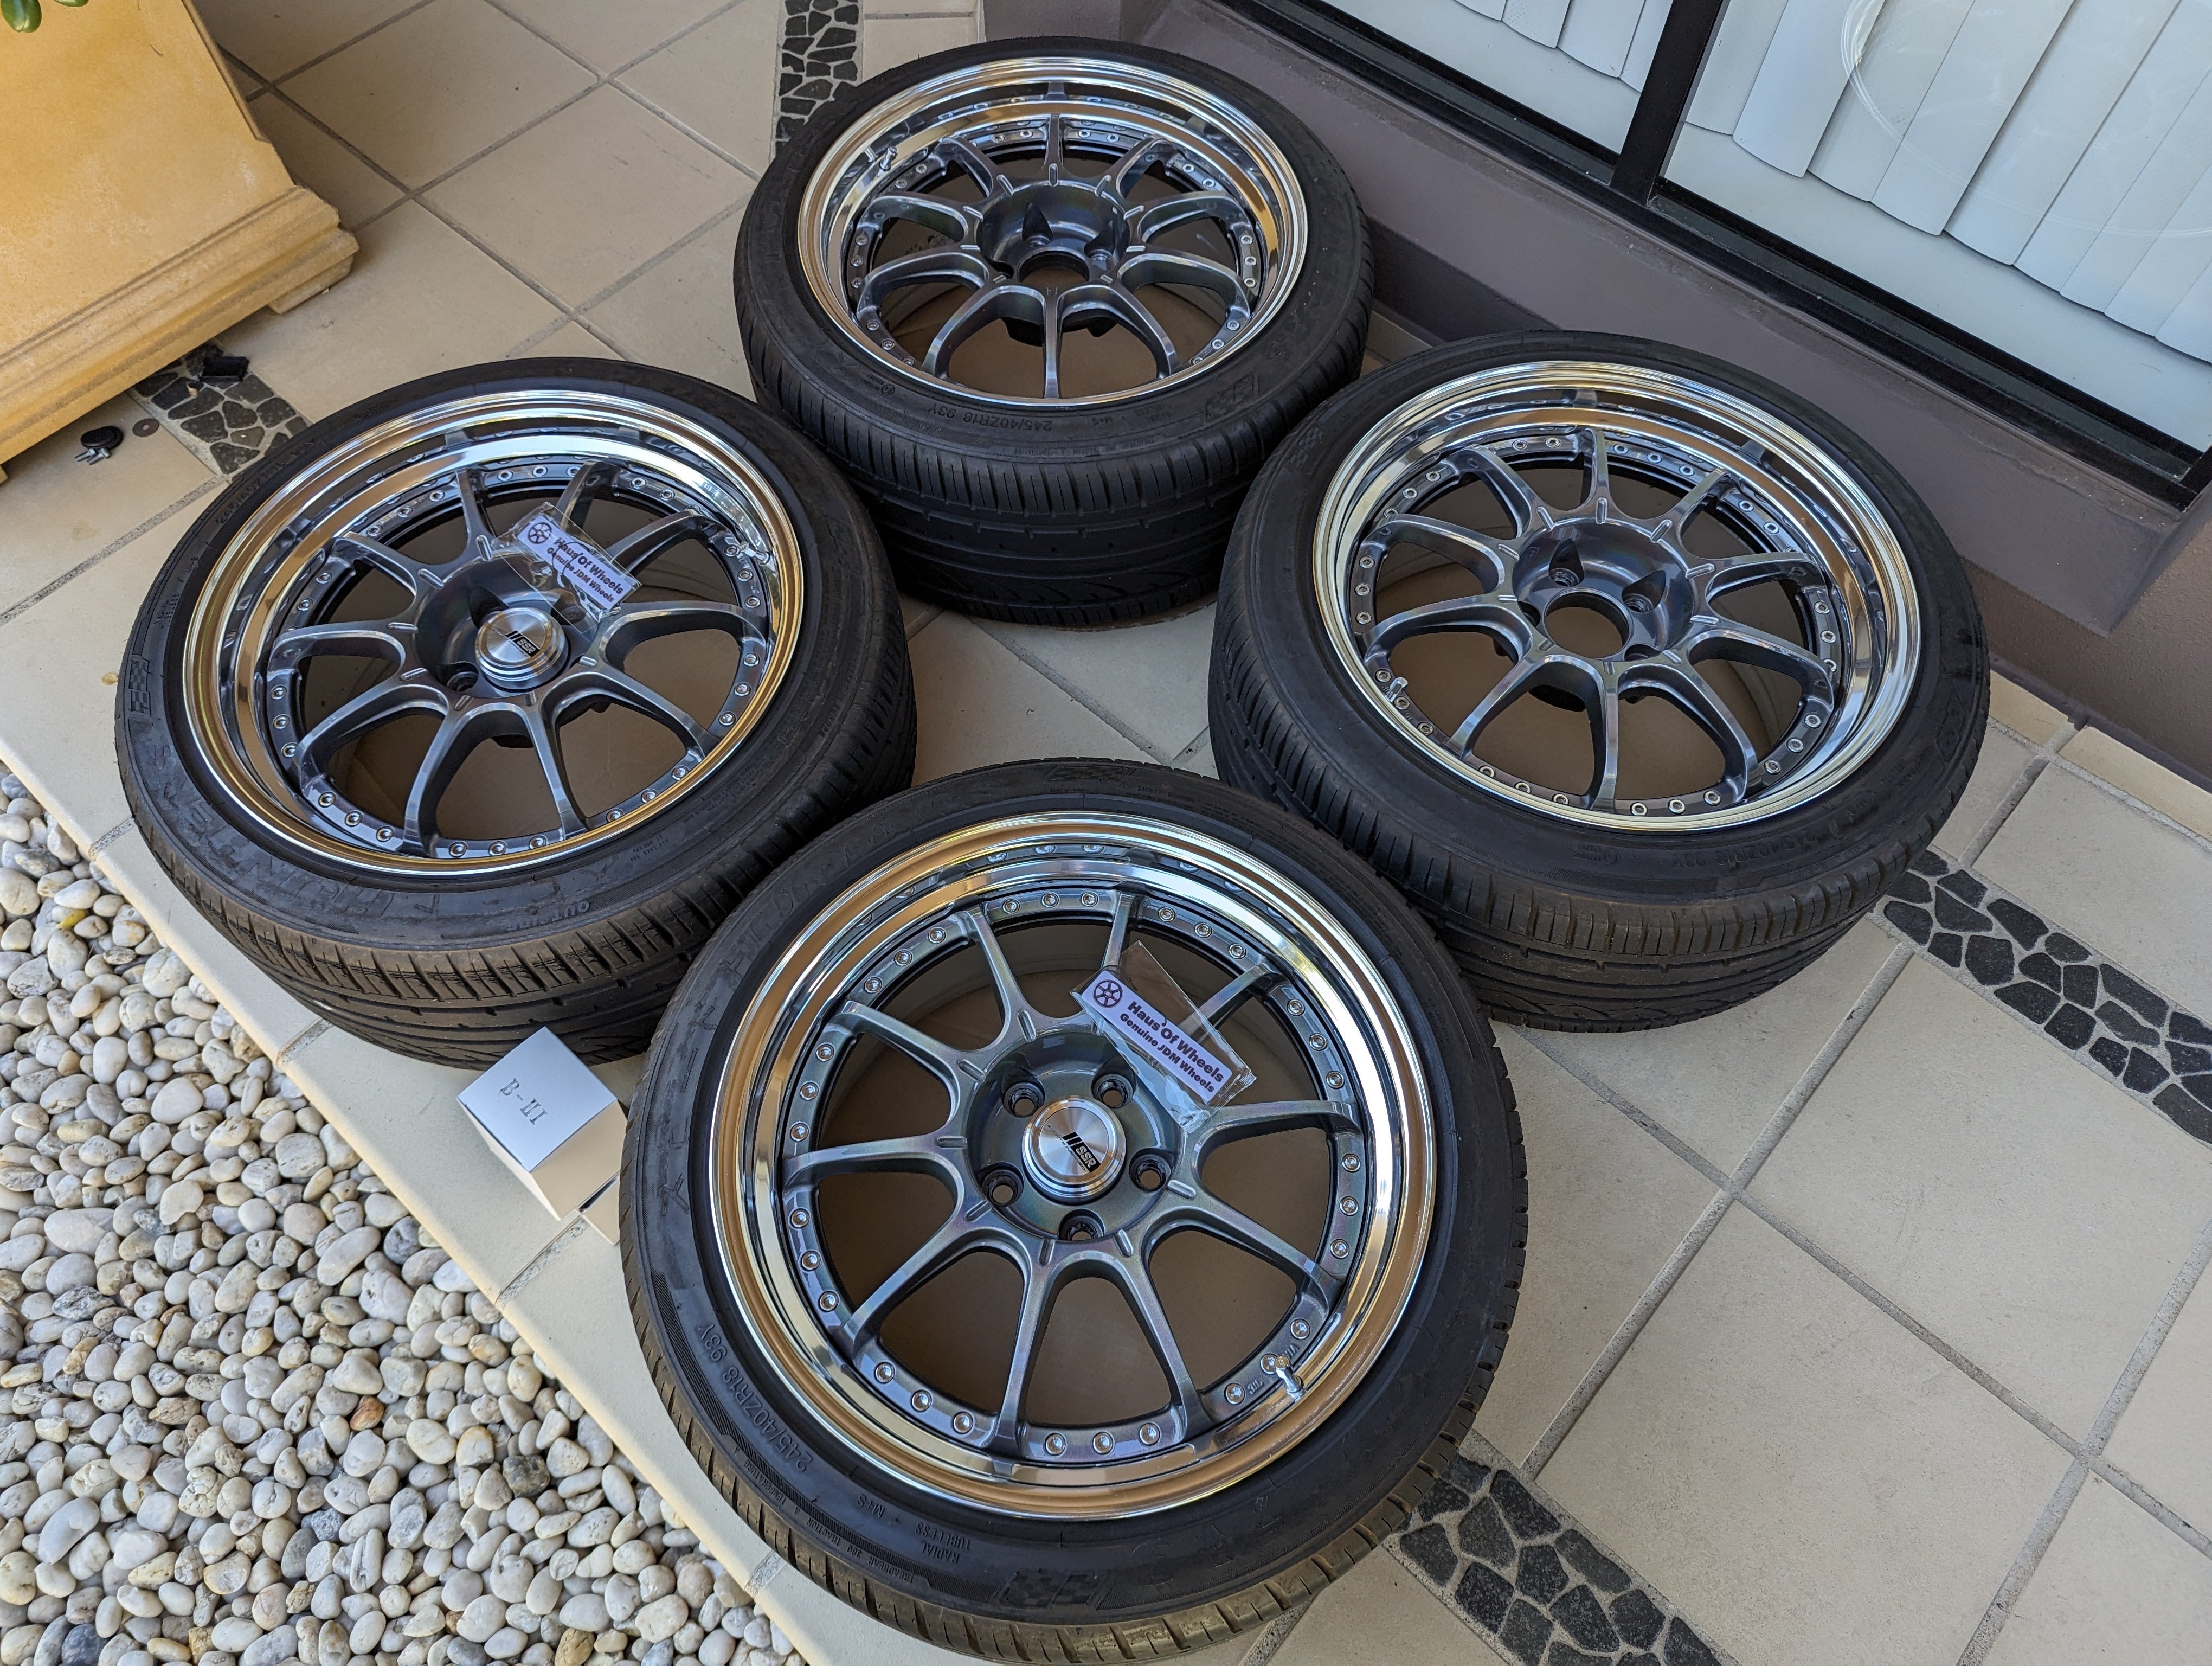 SSR SP5 (Spectrum Silver) 3 Pieces Wheels with Near New Tyres